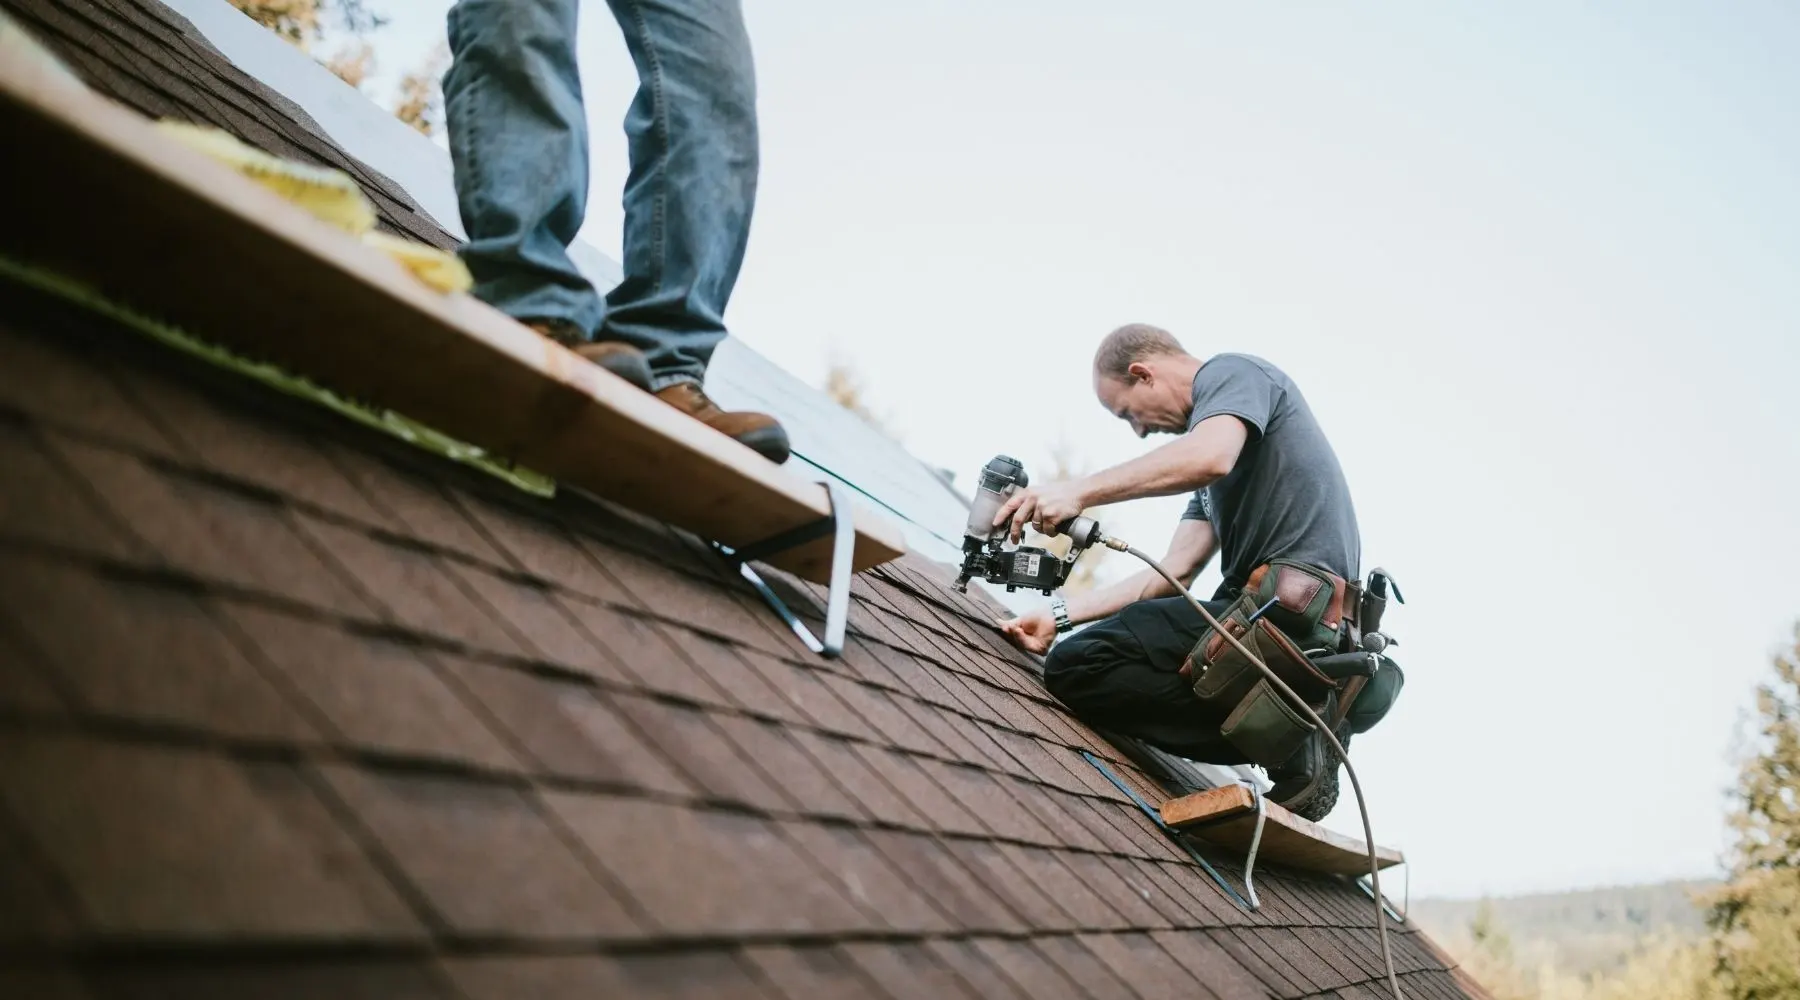 Two men work on fixing a roof together.